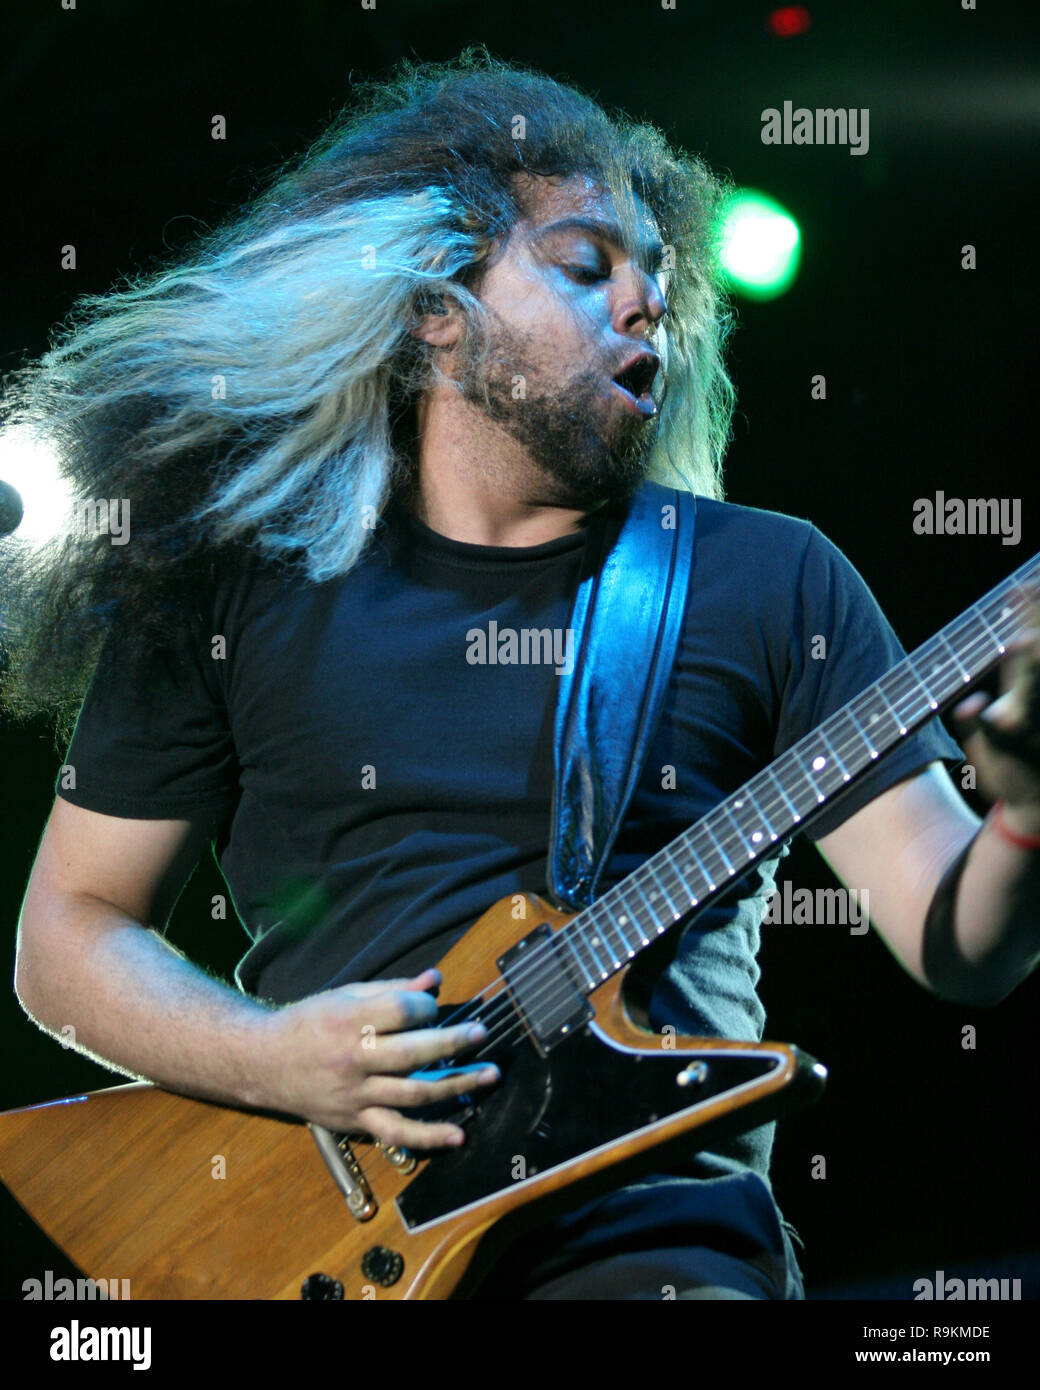 Claudio Sanchez with Coheed & Cambria perform in concert at the Global Gathering 2006 Festival at the Bicentennial Park in Miami, Florida on March 18, 2006. Stock Photo